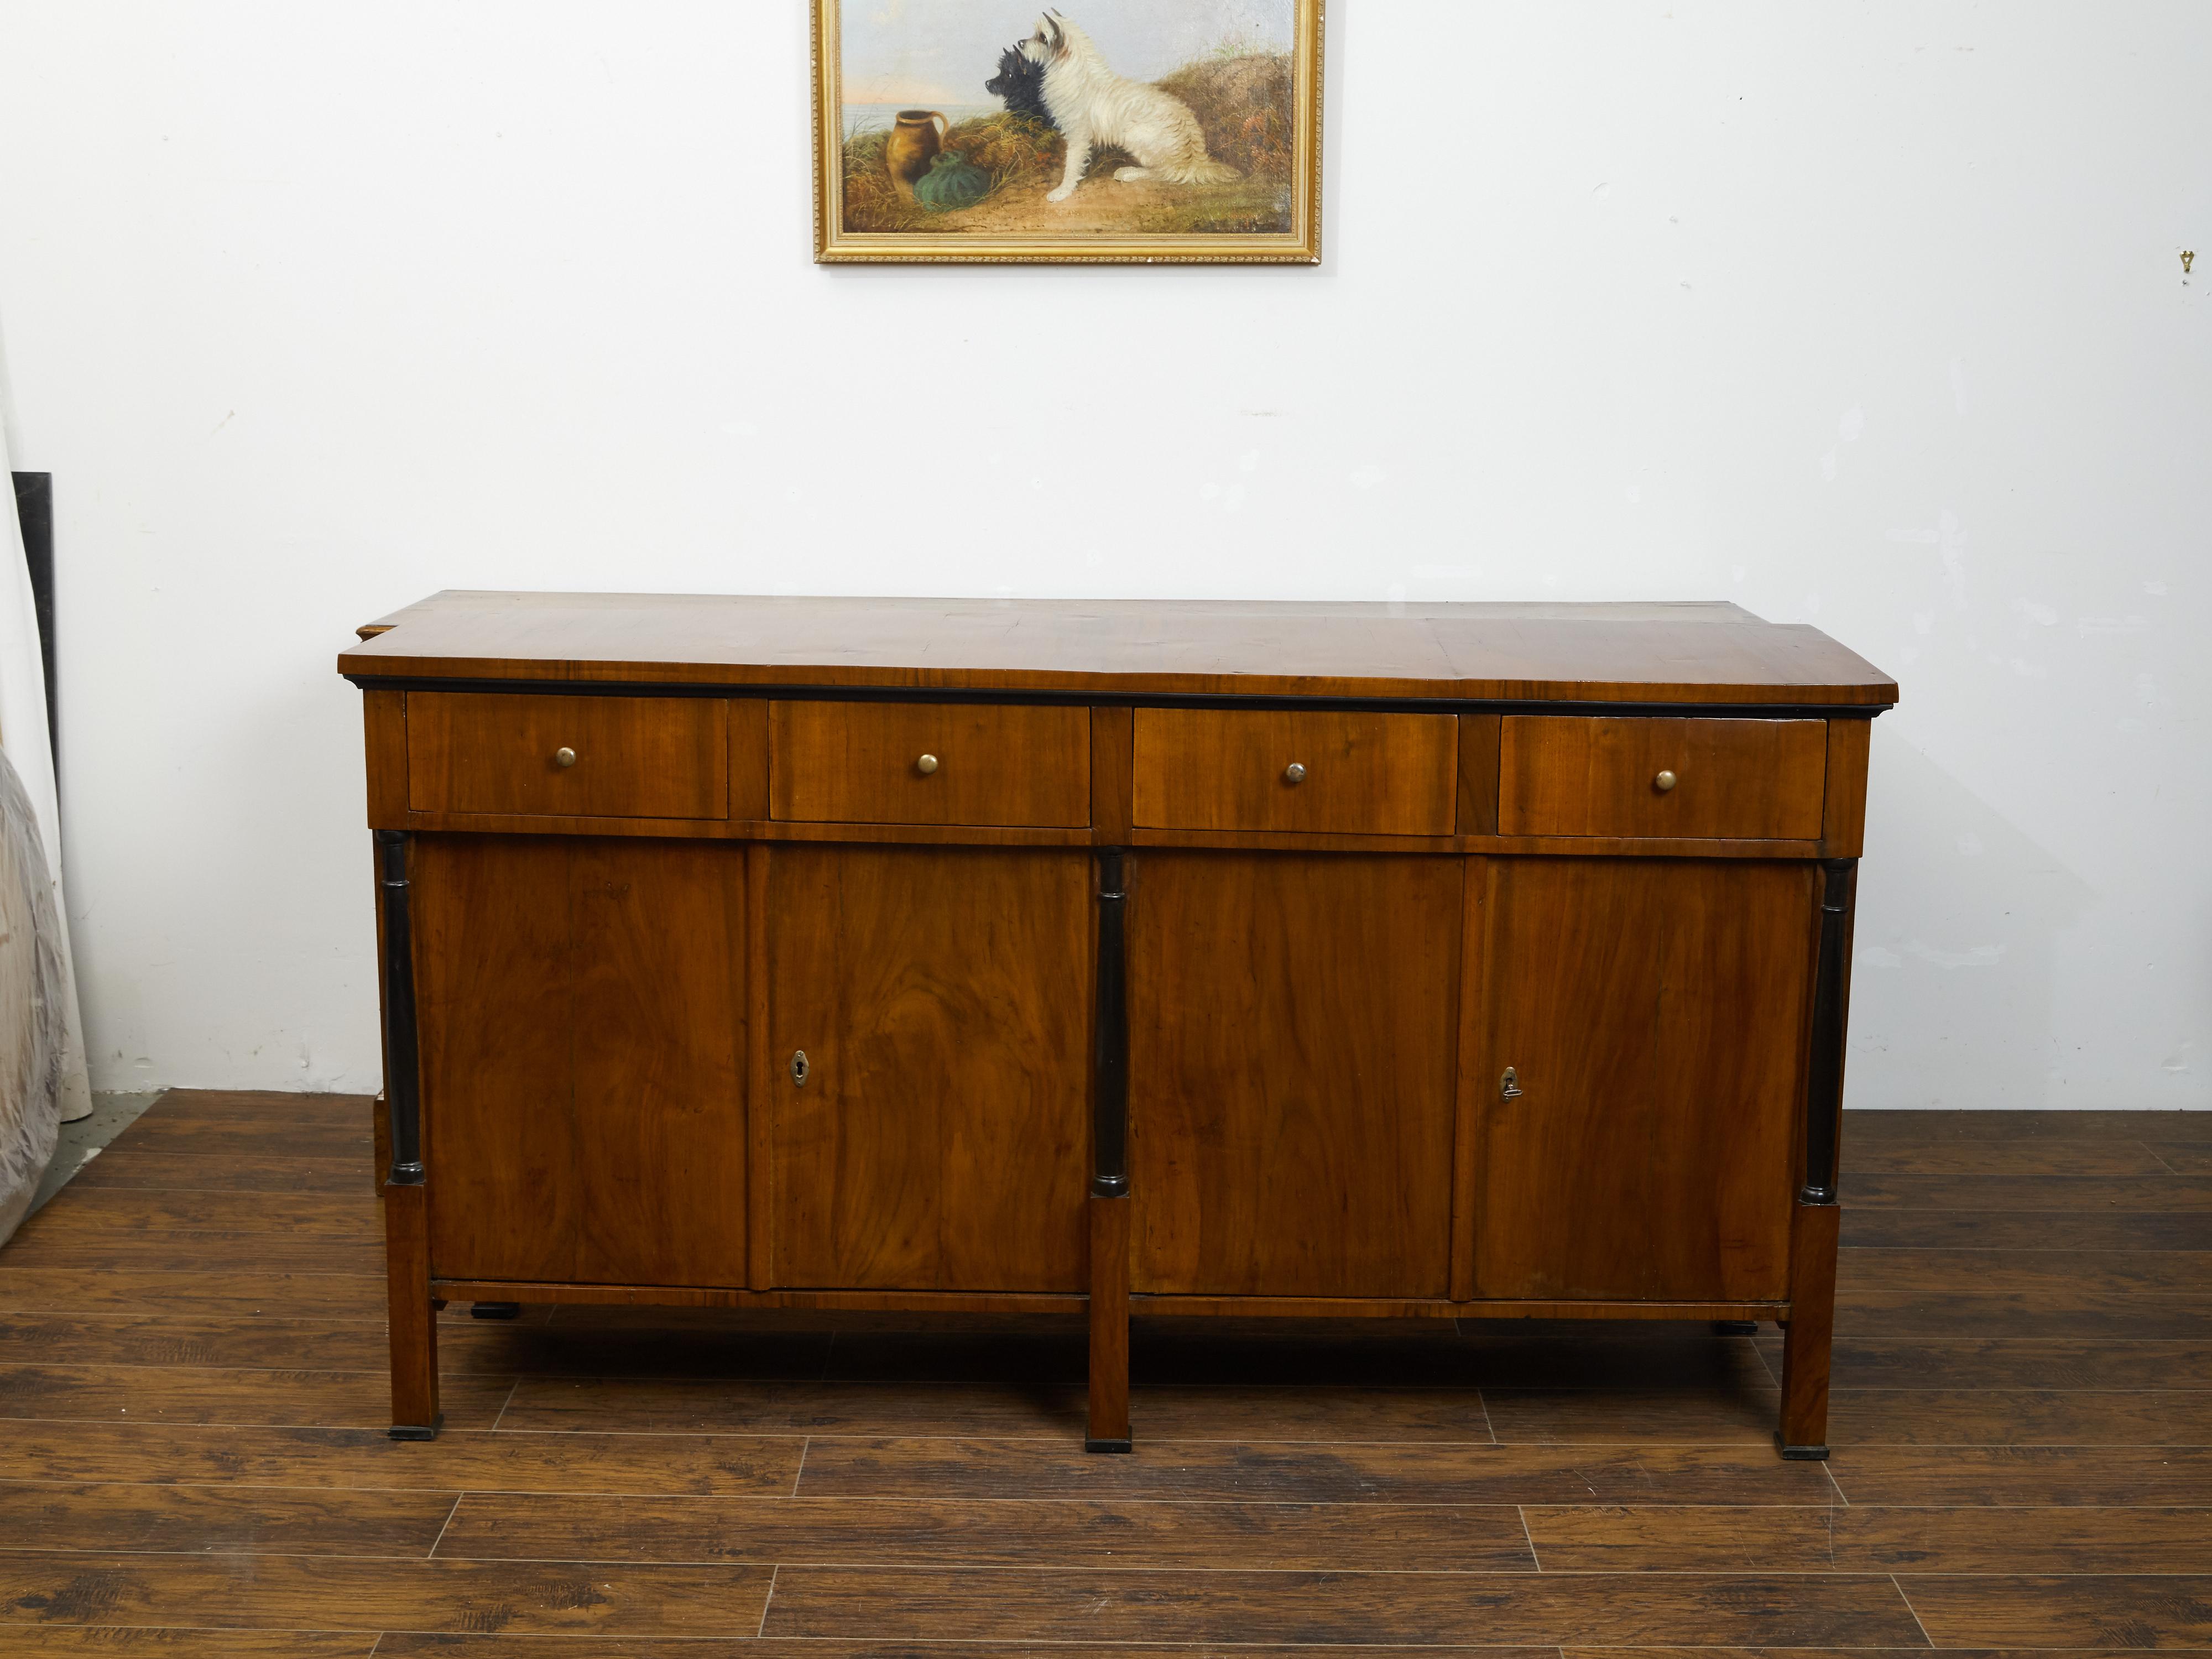 An Austrian Biedermeier period walnut sideboard from the mid 19th century, with four drawers, two pairs of double doors and ebonized columns. Created in Austria during the second quarter of the 19th century, this Biedermeier sideboard features a